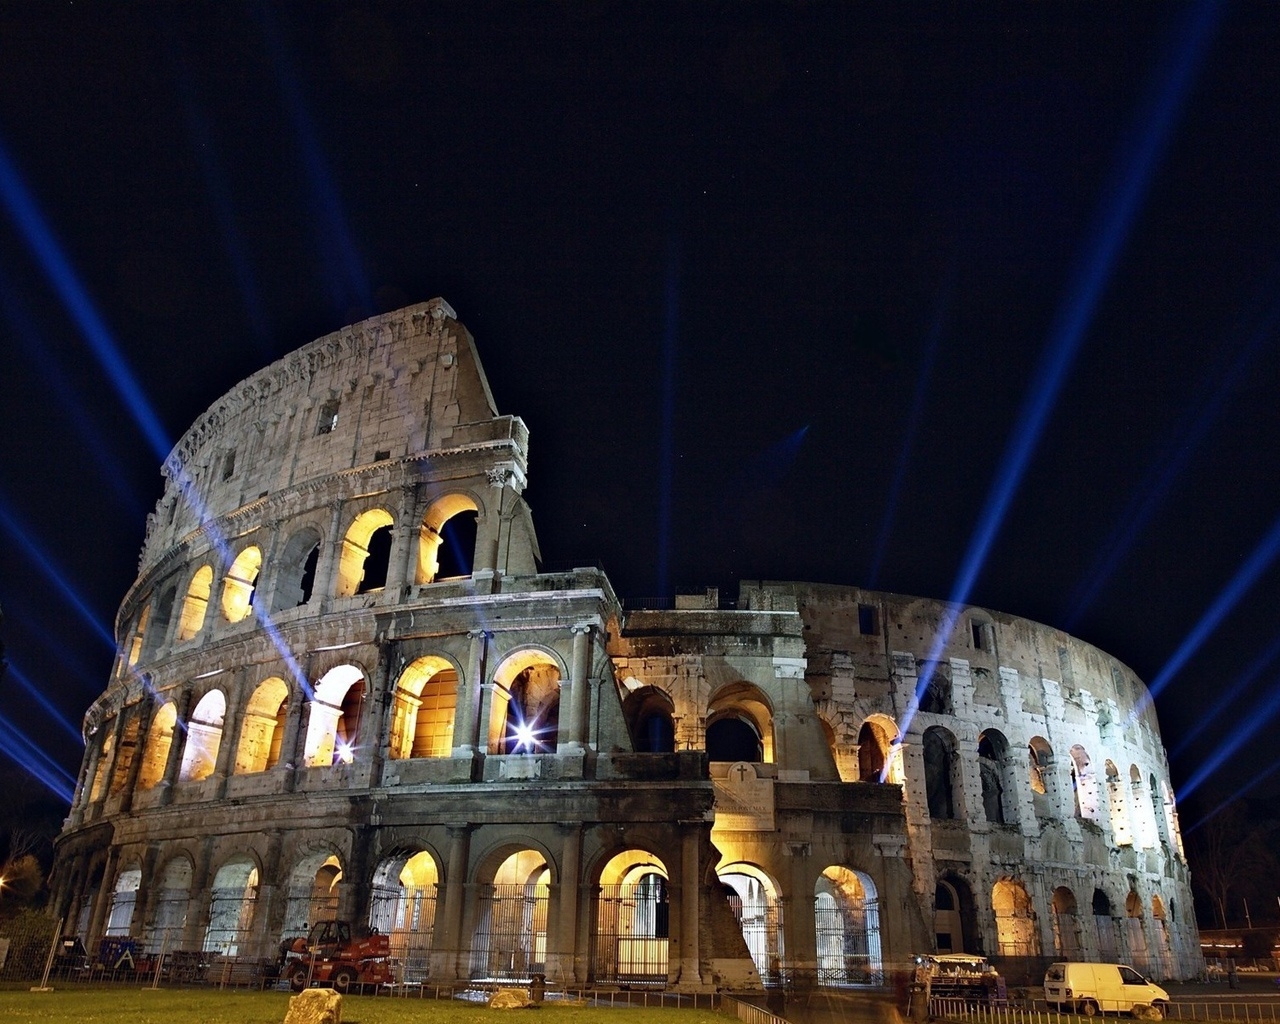 Colloseum during the Night for 1280 x 1024 resolution